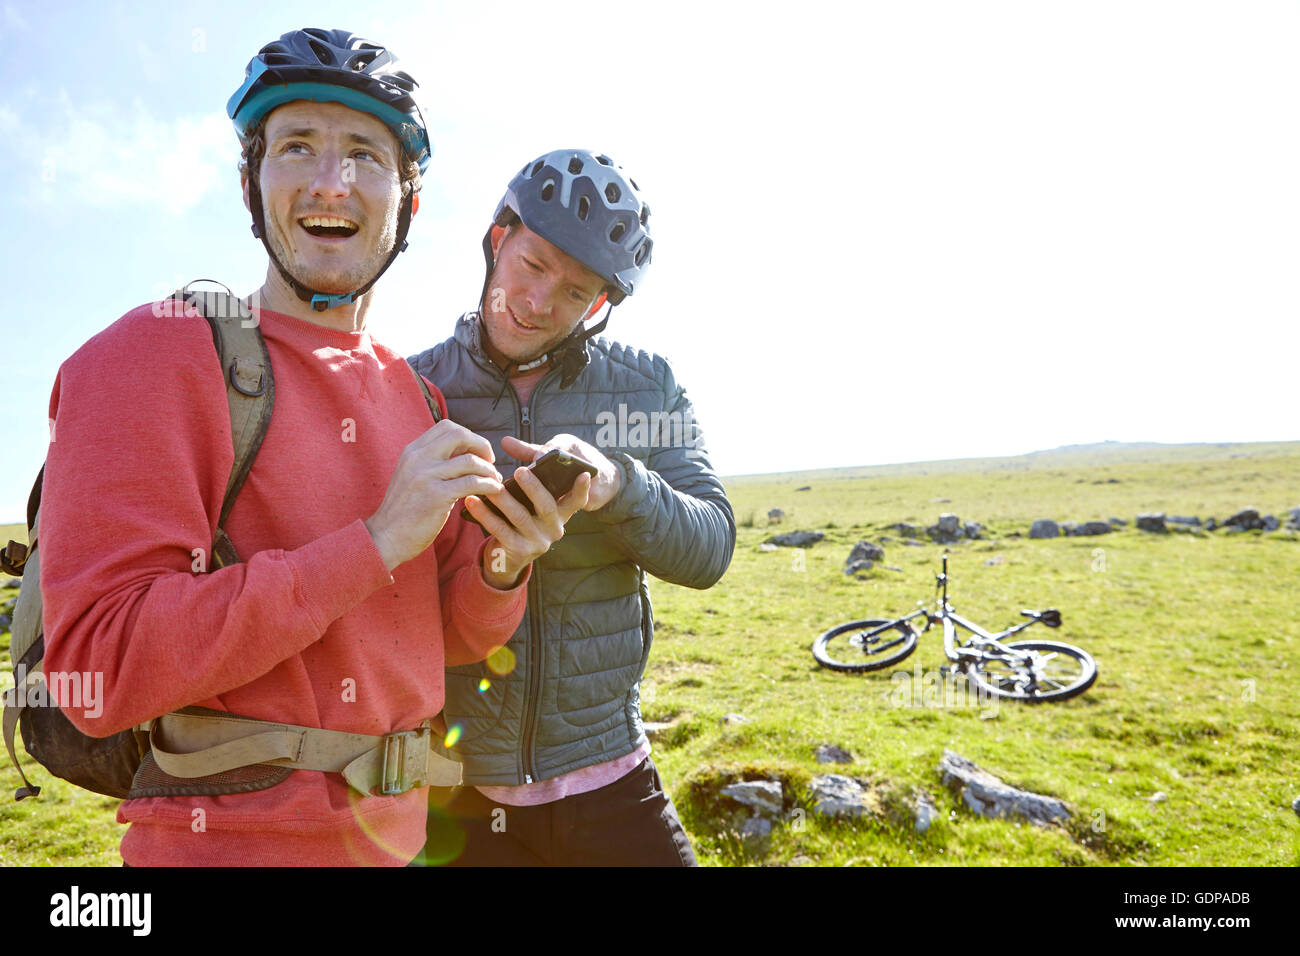 Cyclists on hillside looking at smartphone Stock Photo